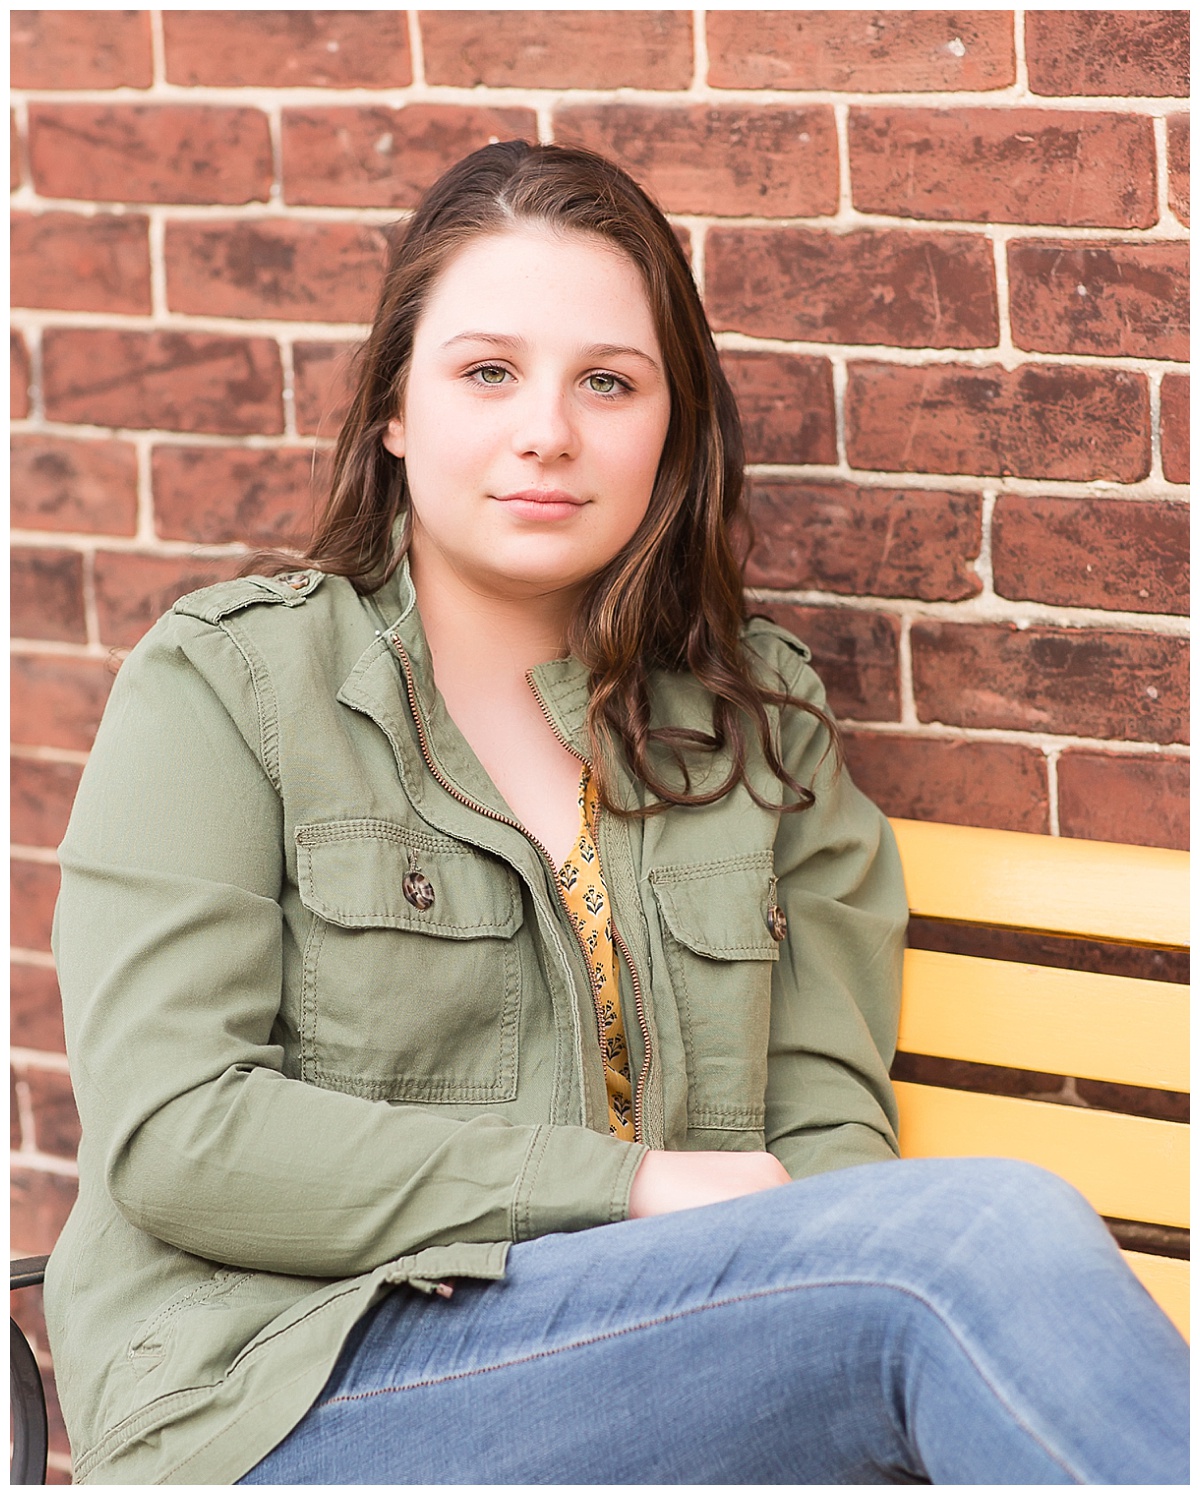 senior girl on bench with brick wall background